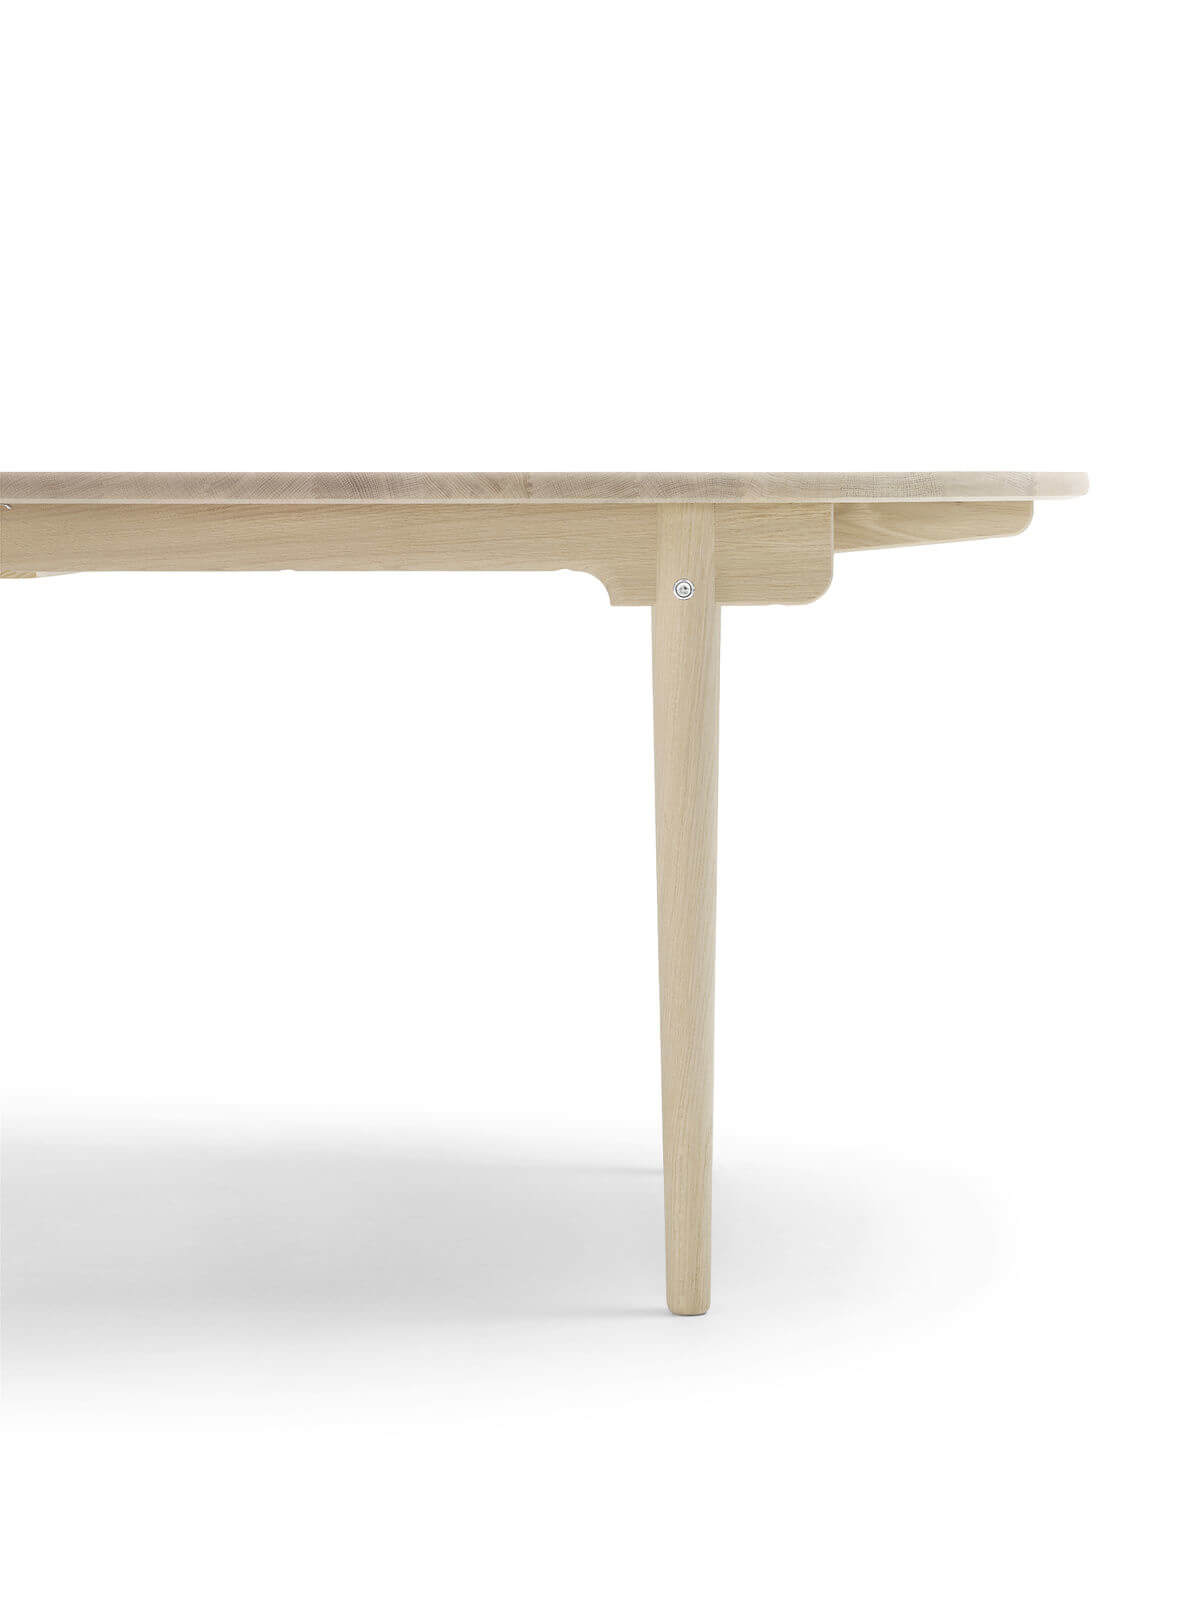 CH338 dining table